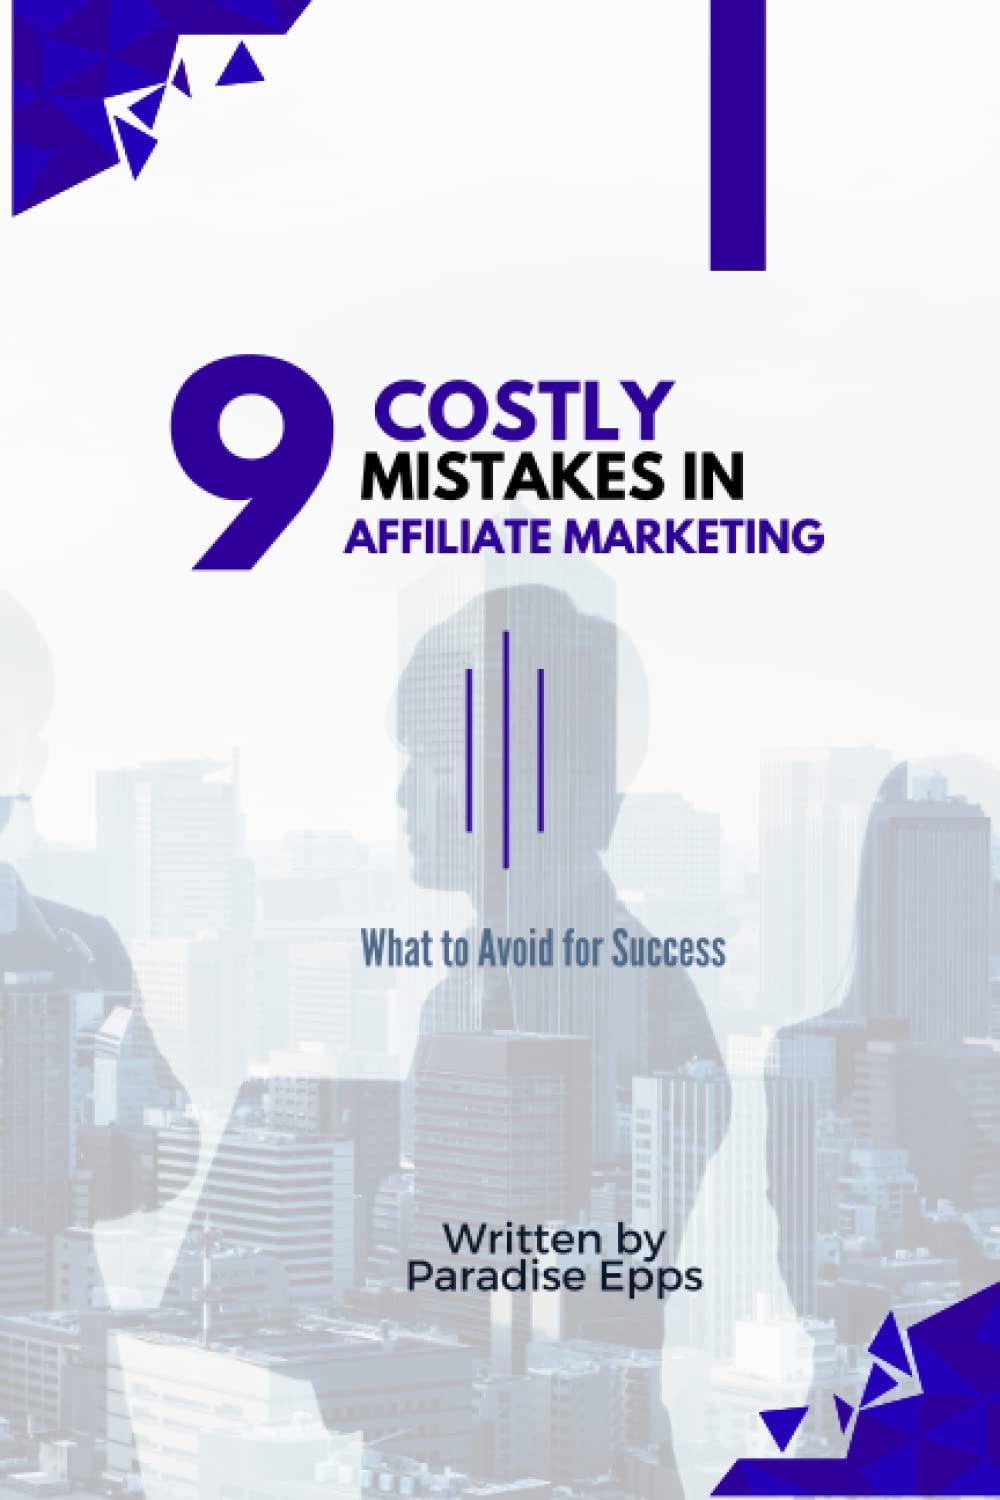 9 costly mistakes in affiliate marketing what to avoid for success 1st edition paradise epps b0c12p642d,